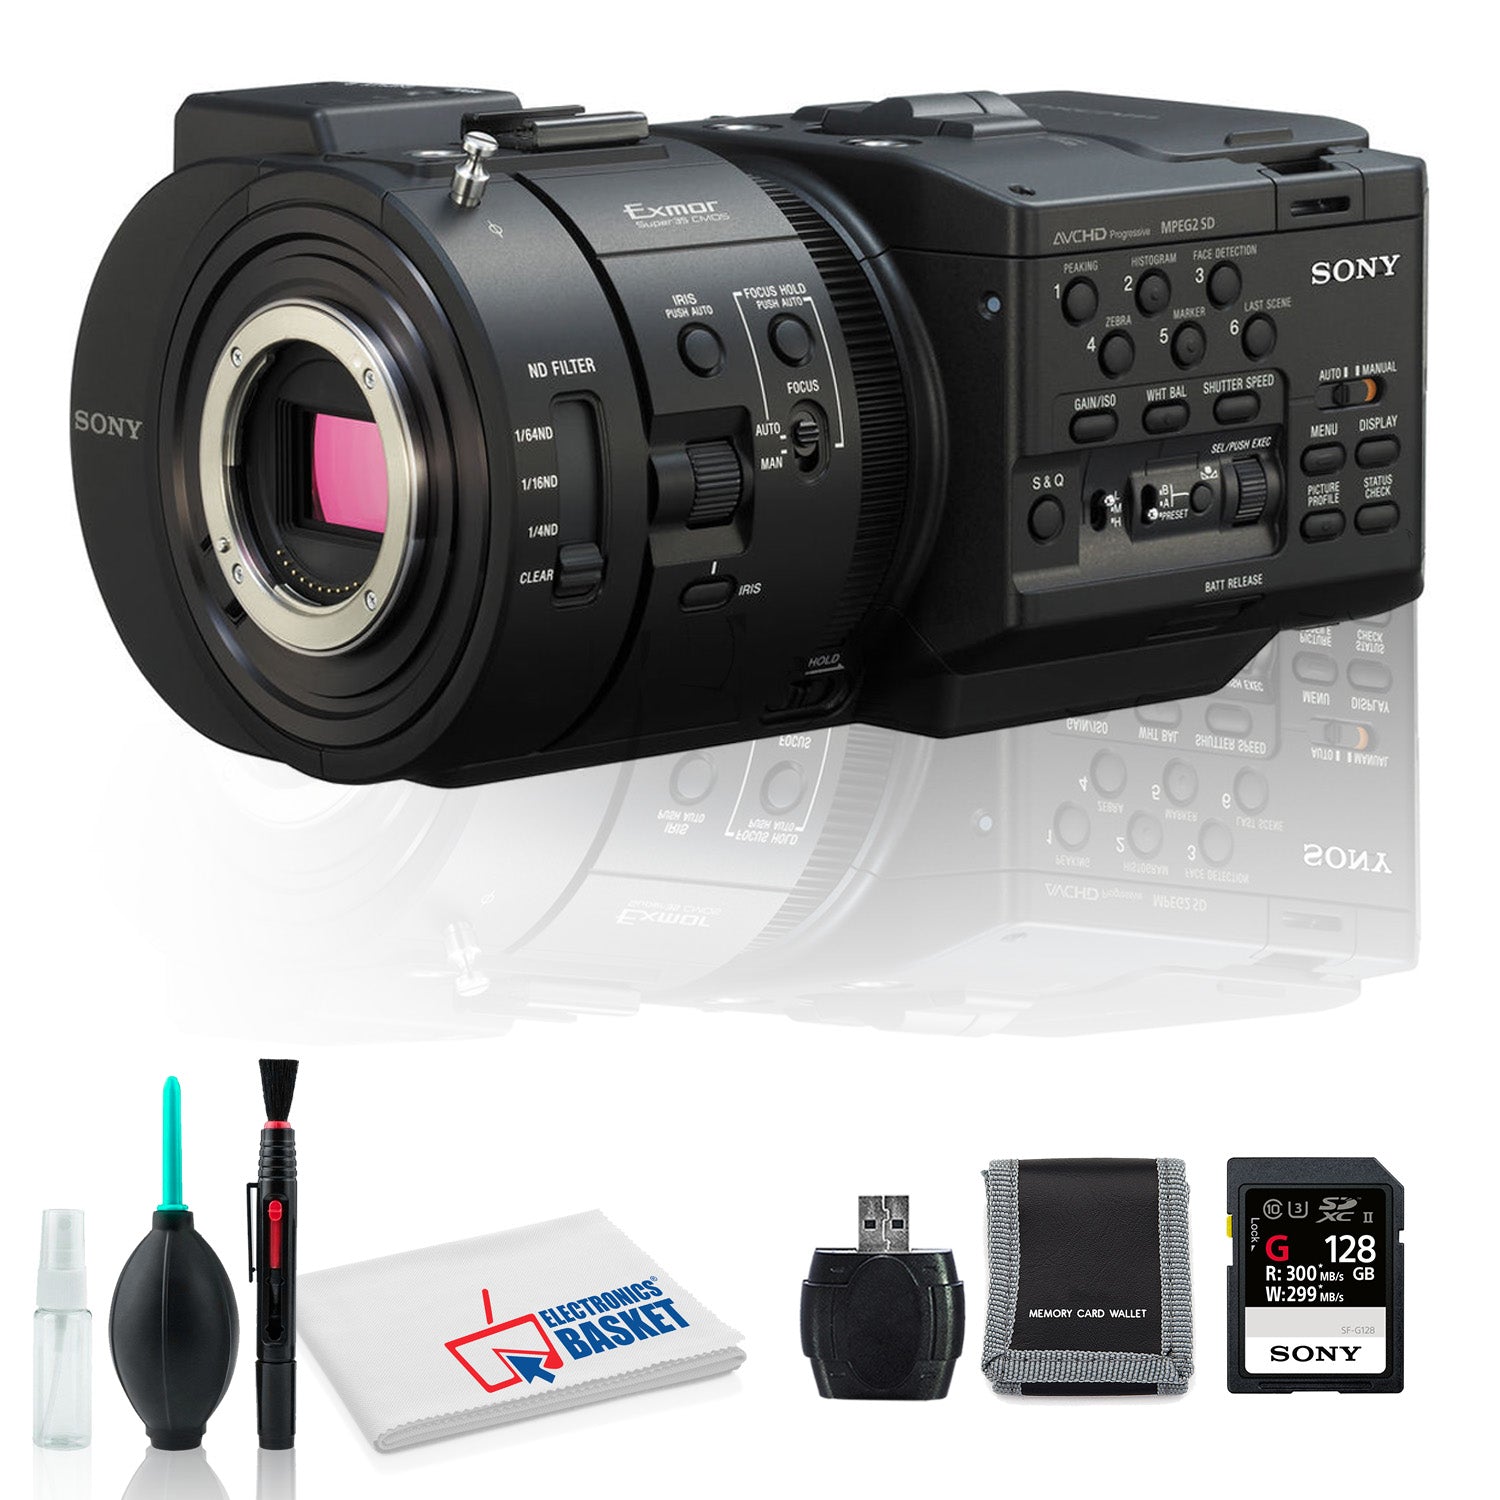 Sony NEX-FS700R Camcorder with Microfiber Cloth, Lens Cleaning Kit, and 128GB Memory Kit (Intl Model)